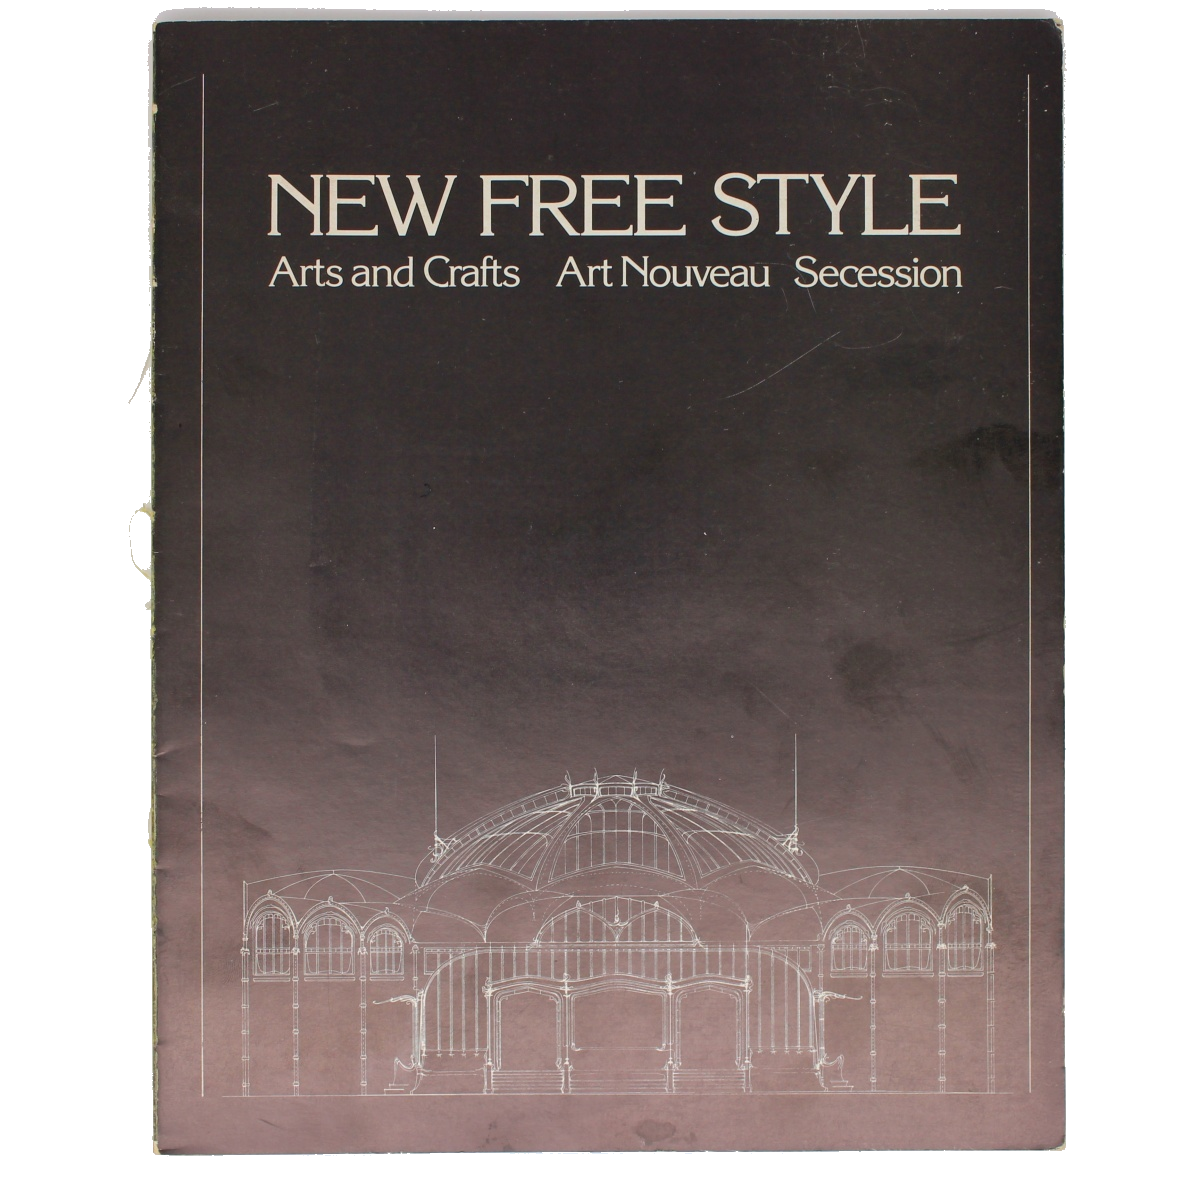 New Free Style Arts and Crafts Art Nouveau Secession - Coffee Table Book (VINTAGE)